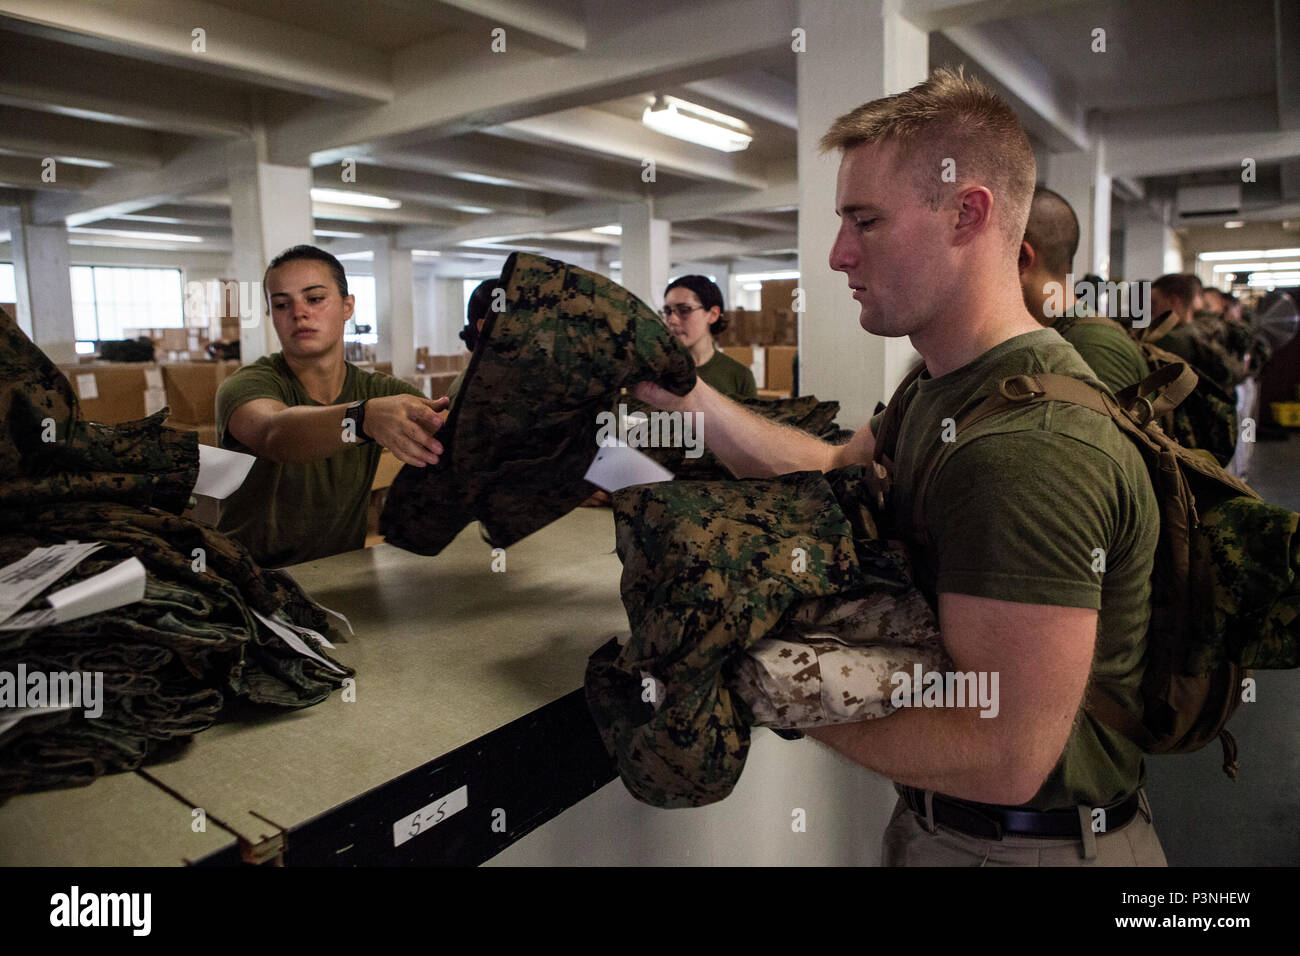 Candidates with India Company, Officer Candidate School (OCS) are issued uniform items aboard Marine Corps Base Quantico, Va., July 6, 2016. The mission of OCS is to educate and train officer candidates in order to evaluate and screen individuals for qualities required for commissioning as a Marine Corps officer. (U.S. Marine Corps Combat Camera photo by Lance Cpl. Jose Villalobosrocha/Released) Stock Photo